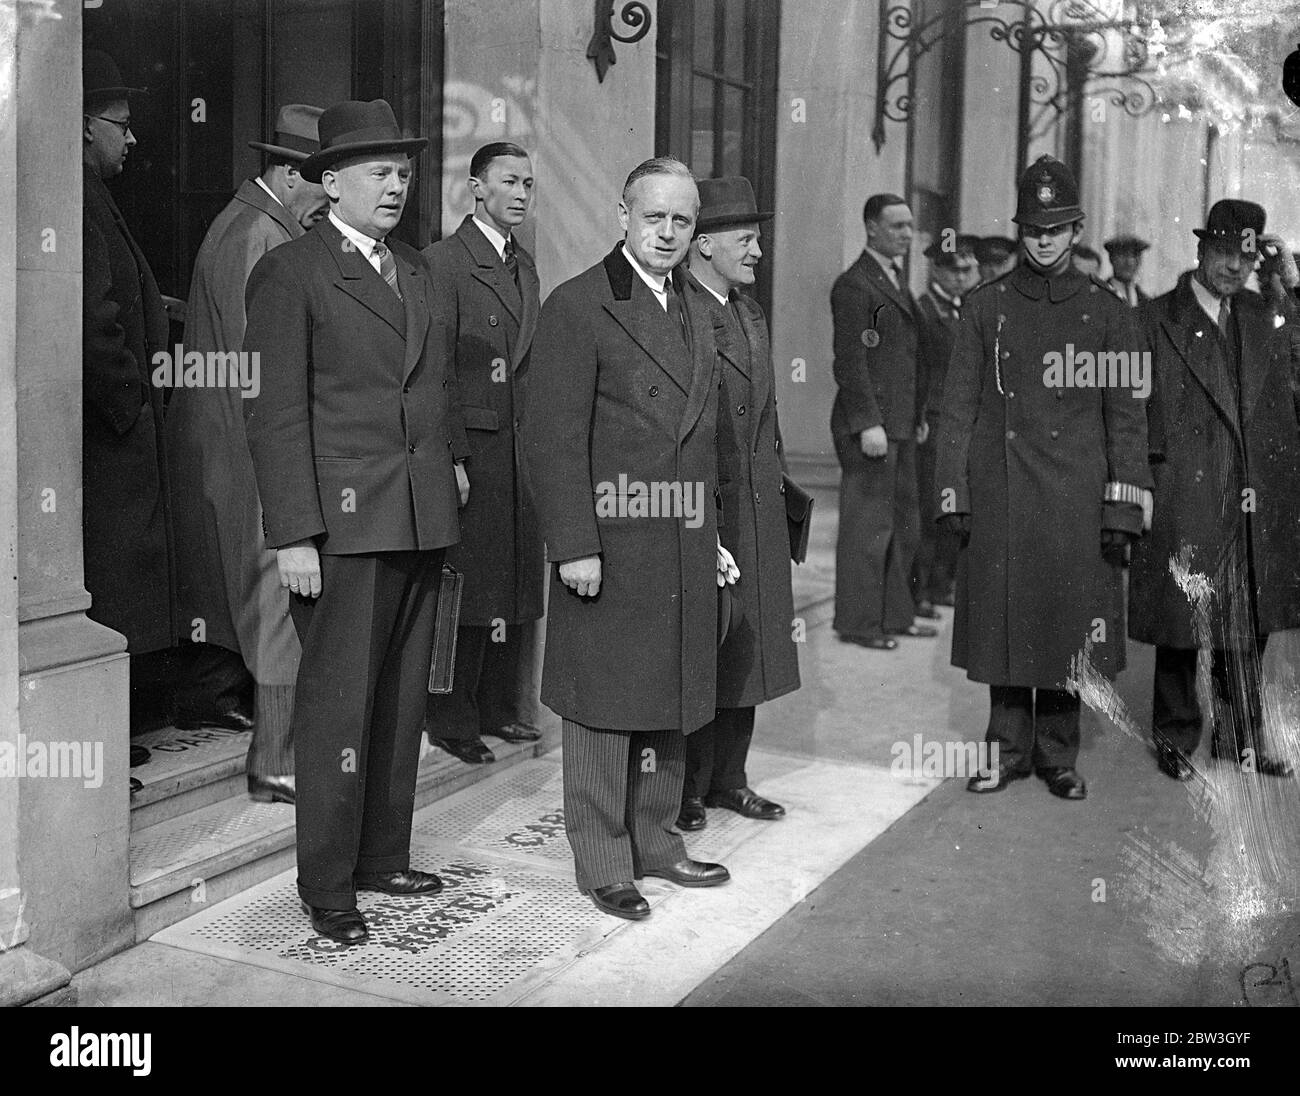 Herr von Ribbentrop goes to League Council meeting . First German representative since 1933 . Herr von Ribbentrop , Herr Hitler ' s Ambassador at large , left his hotel in London to attend first League Council meeting at which Germany has been represented since she left the League in 1933 . Herr von Ribbentrop is taking part in discussions on the reoccupation of the Rhineland . Photo shows , Herr von Ribbentrop leaving his hotel for the League Council meeting . 19 March 1936 Stock Photo